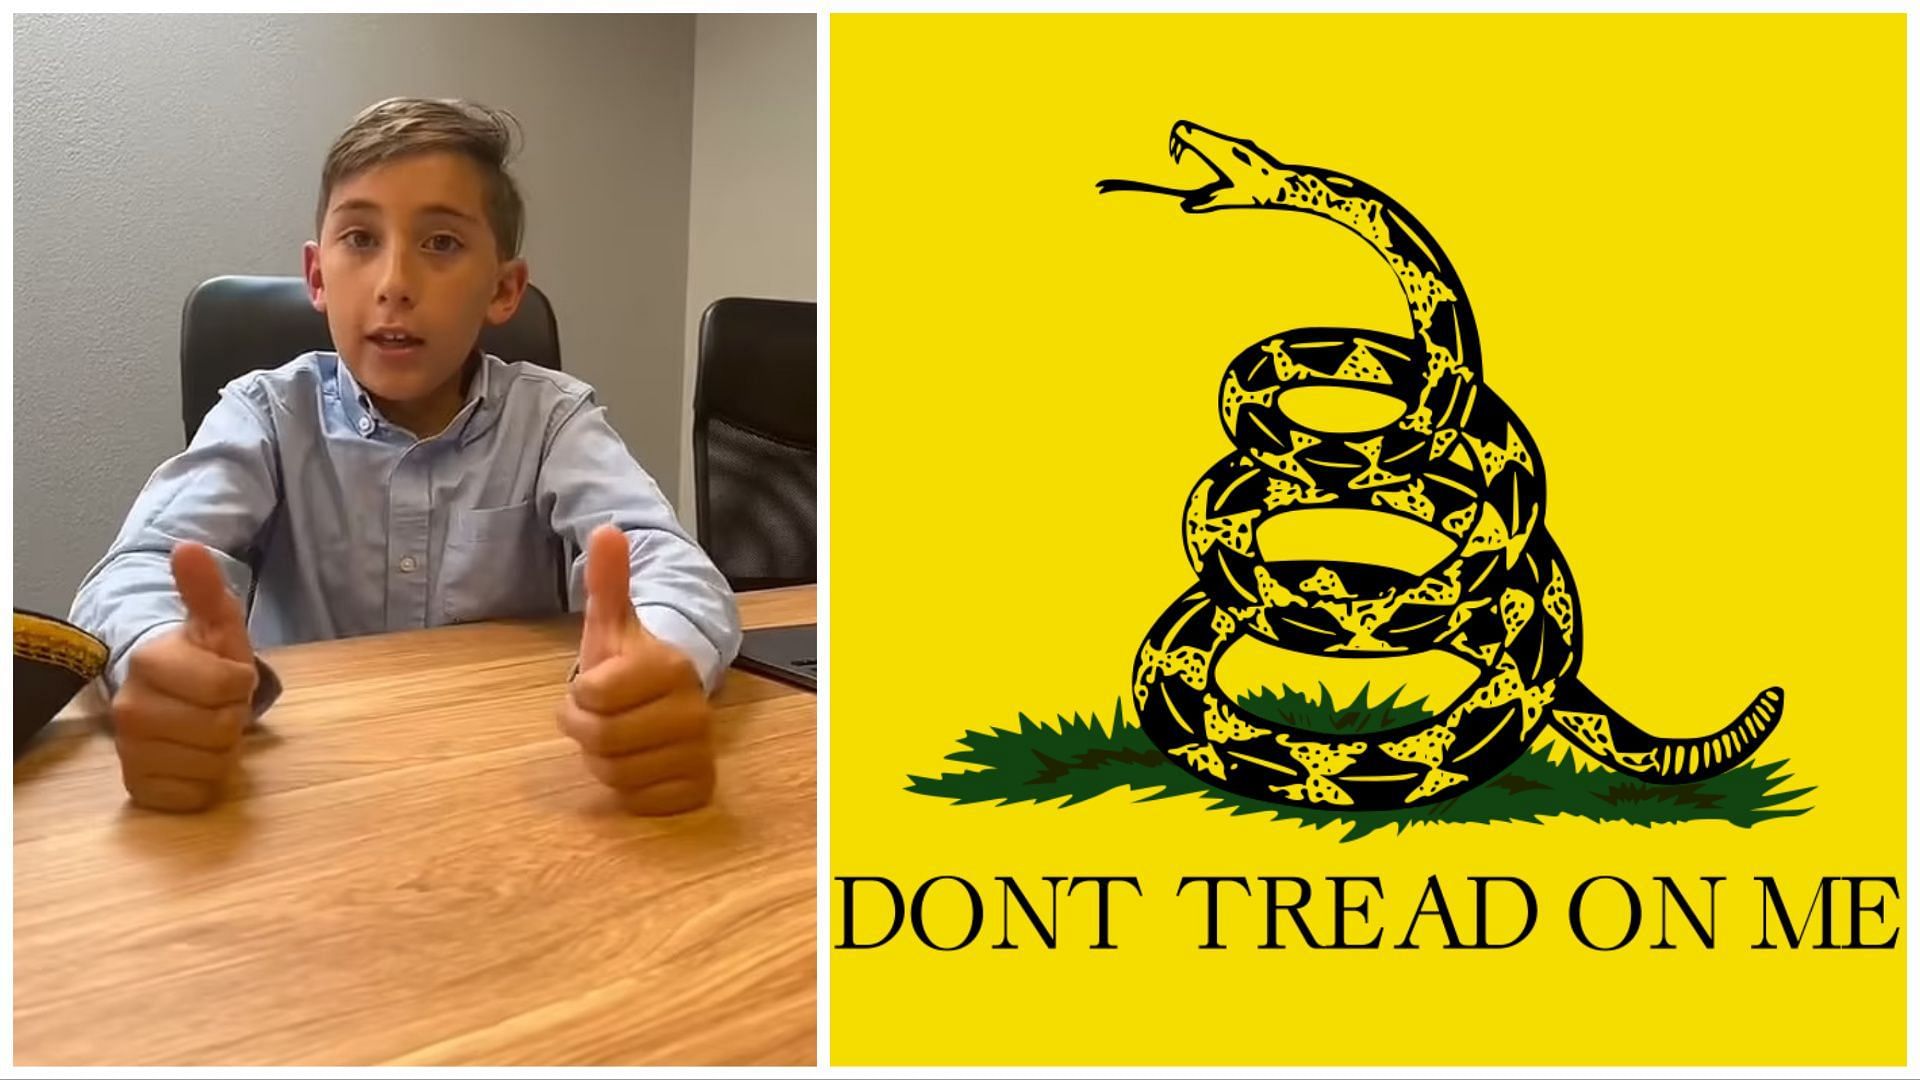 The History of the Dont Tread on Me Patch